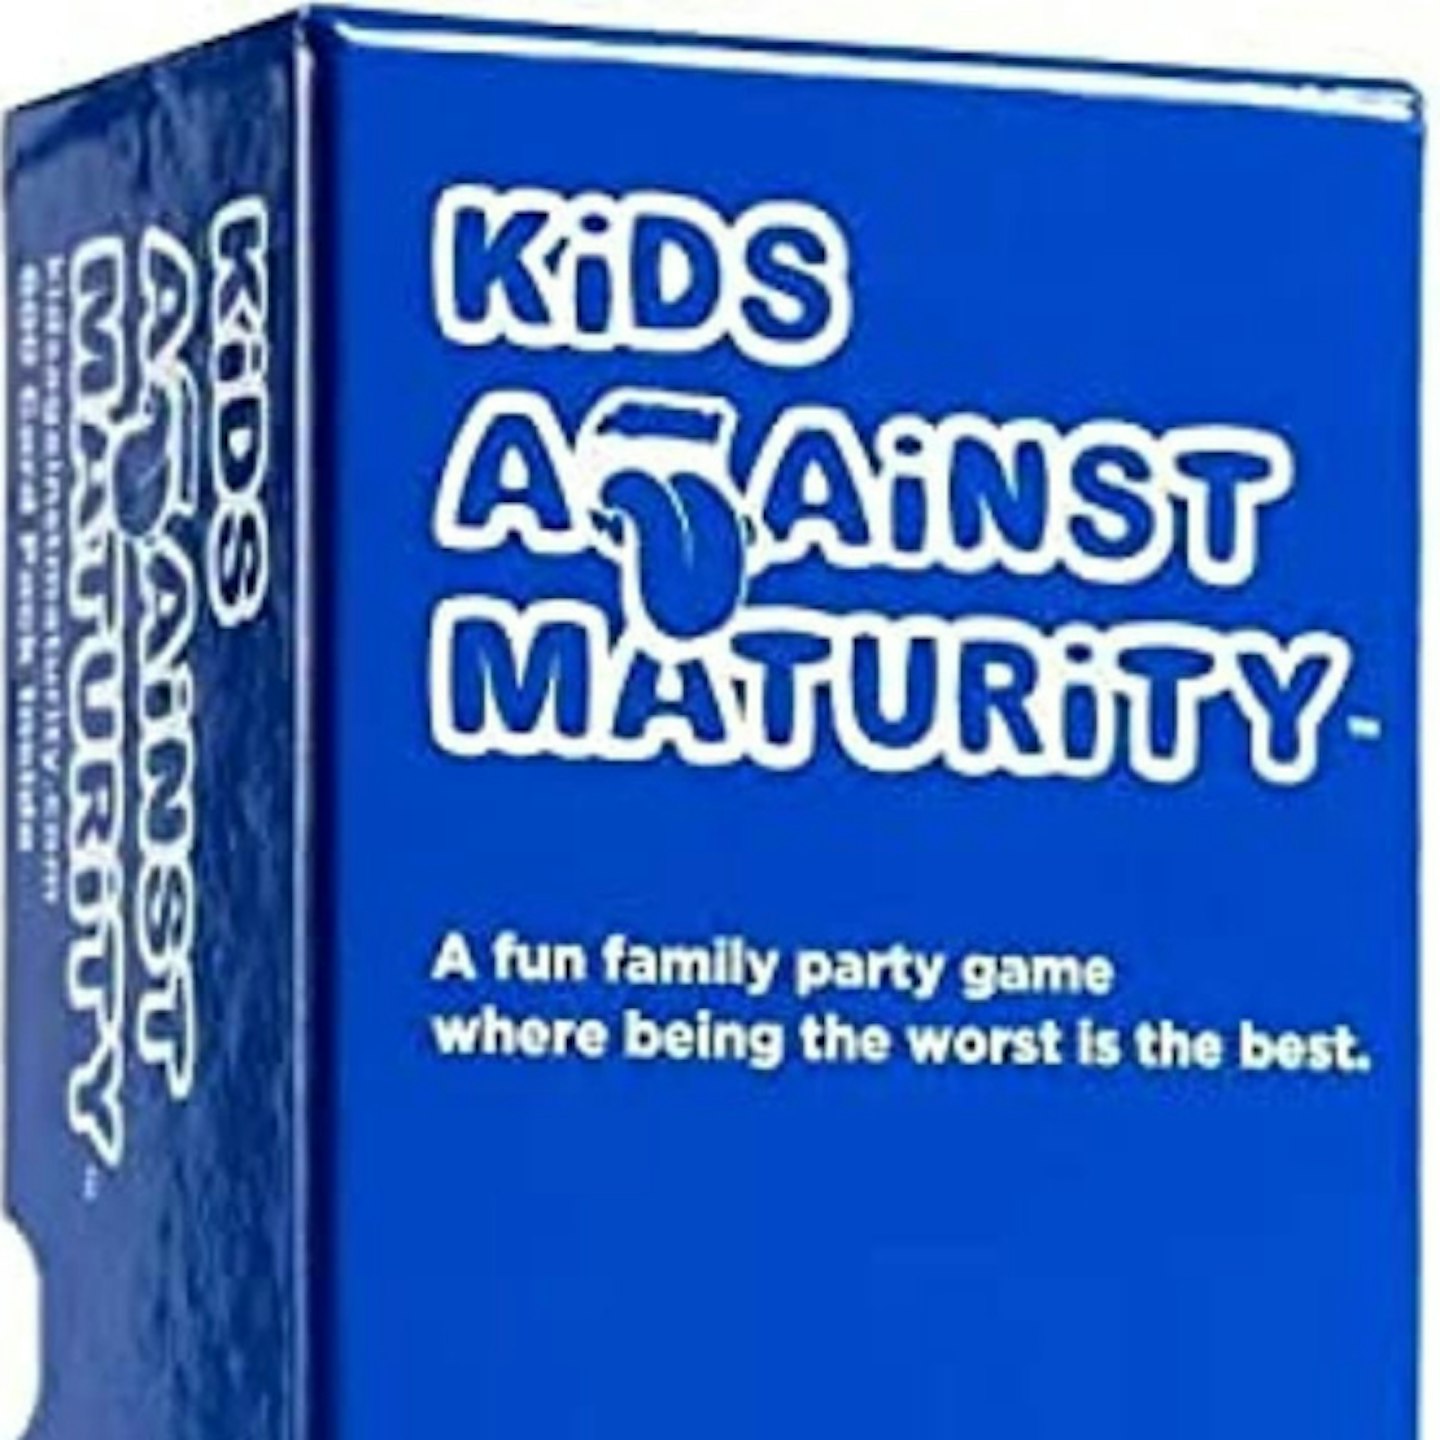 Christmas gifts for a family game